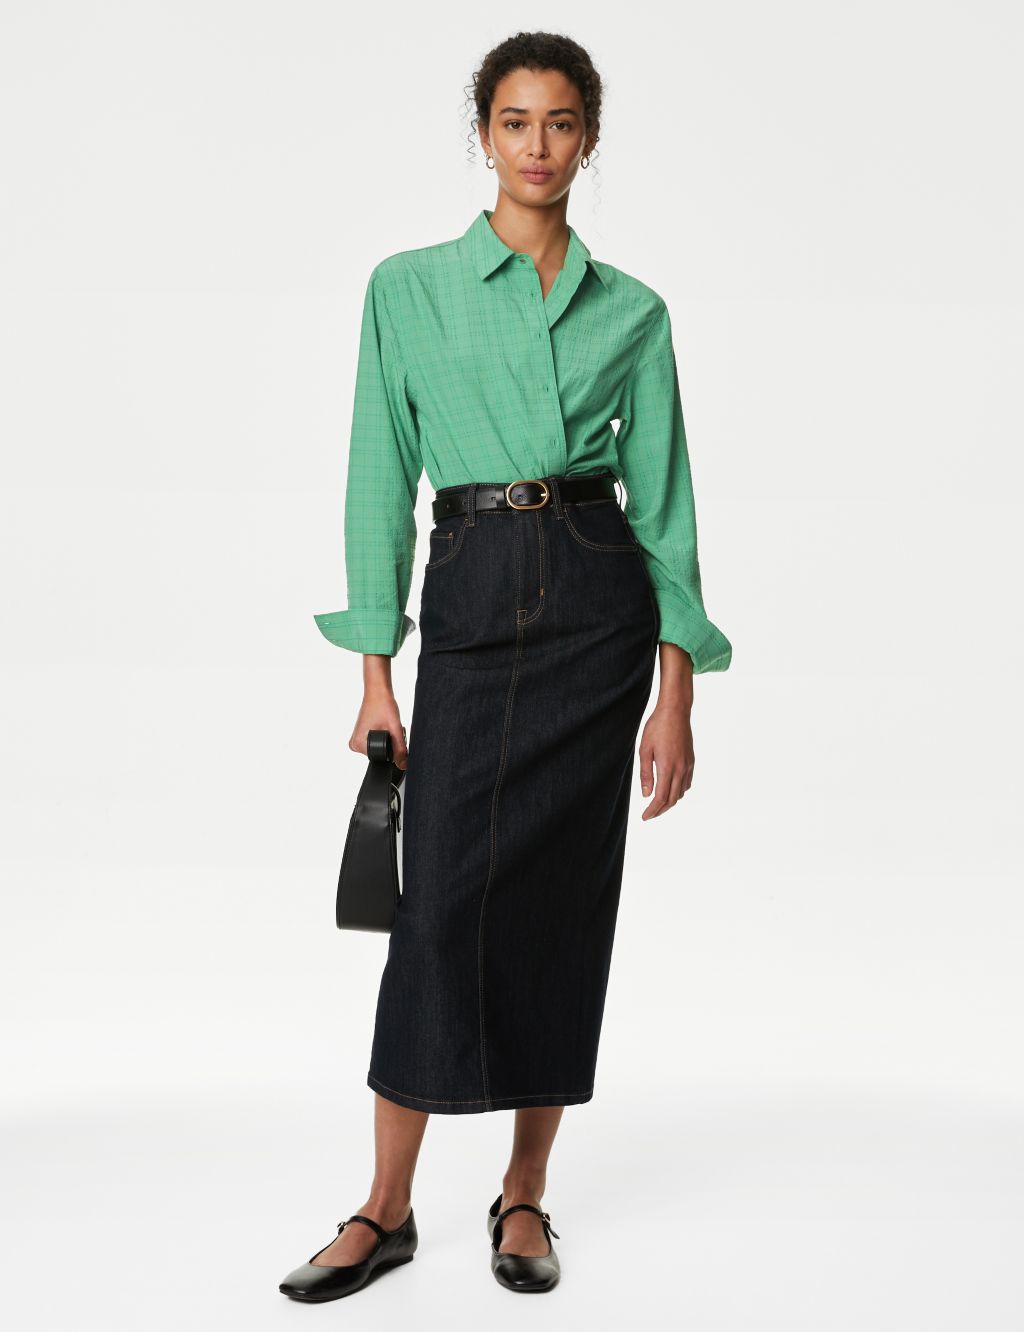 Modal Rich Textured Shirt | M&S Collection | M&S